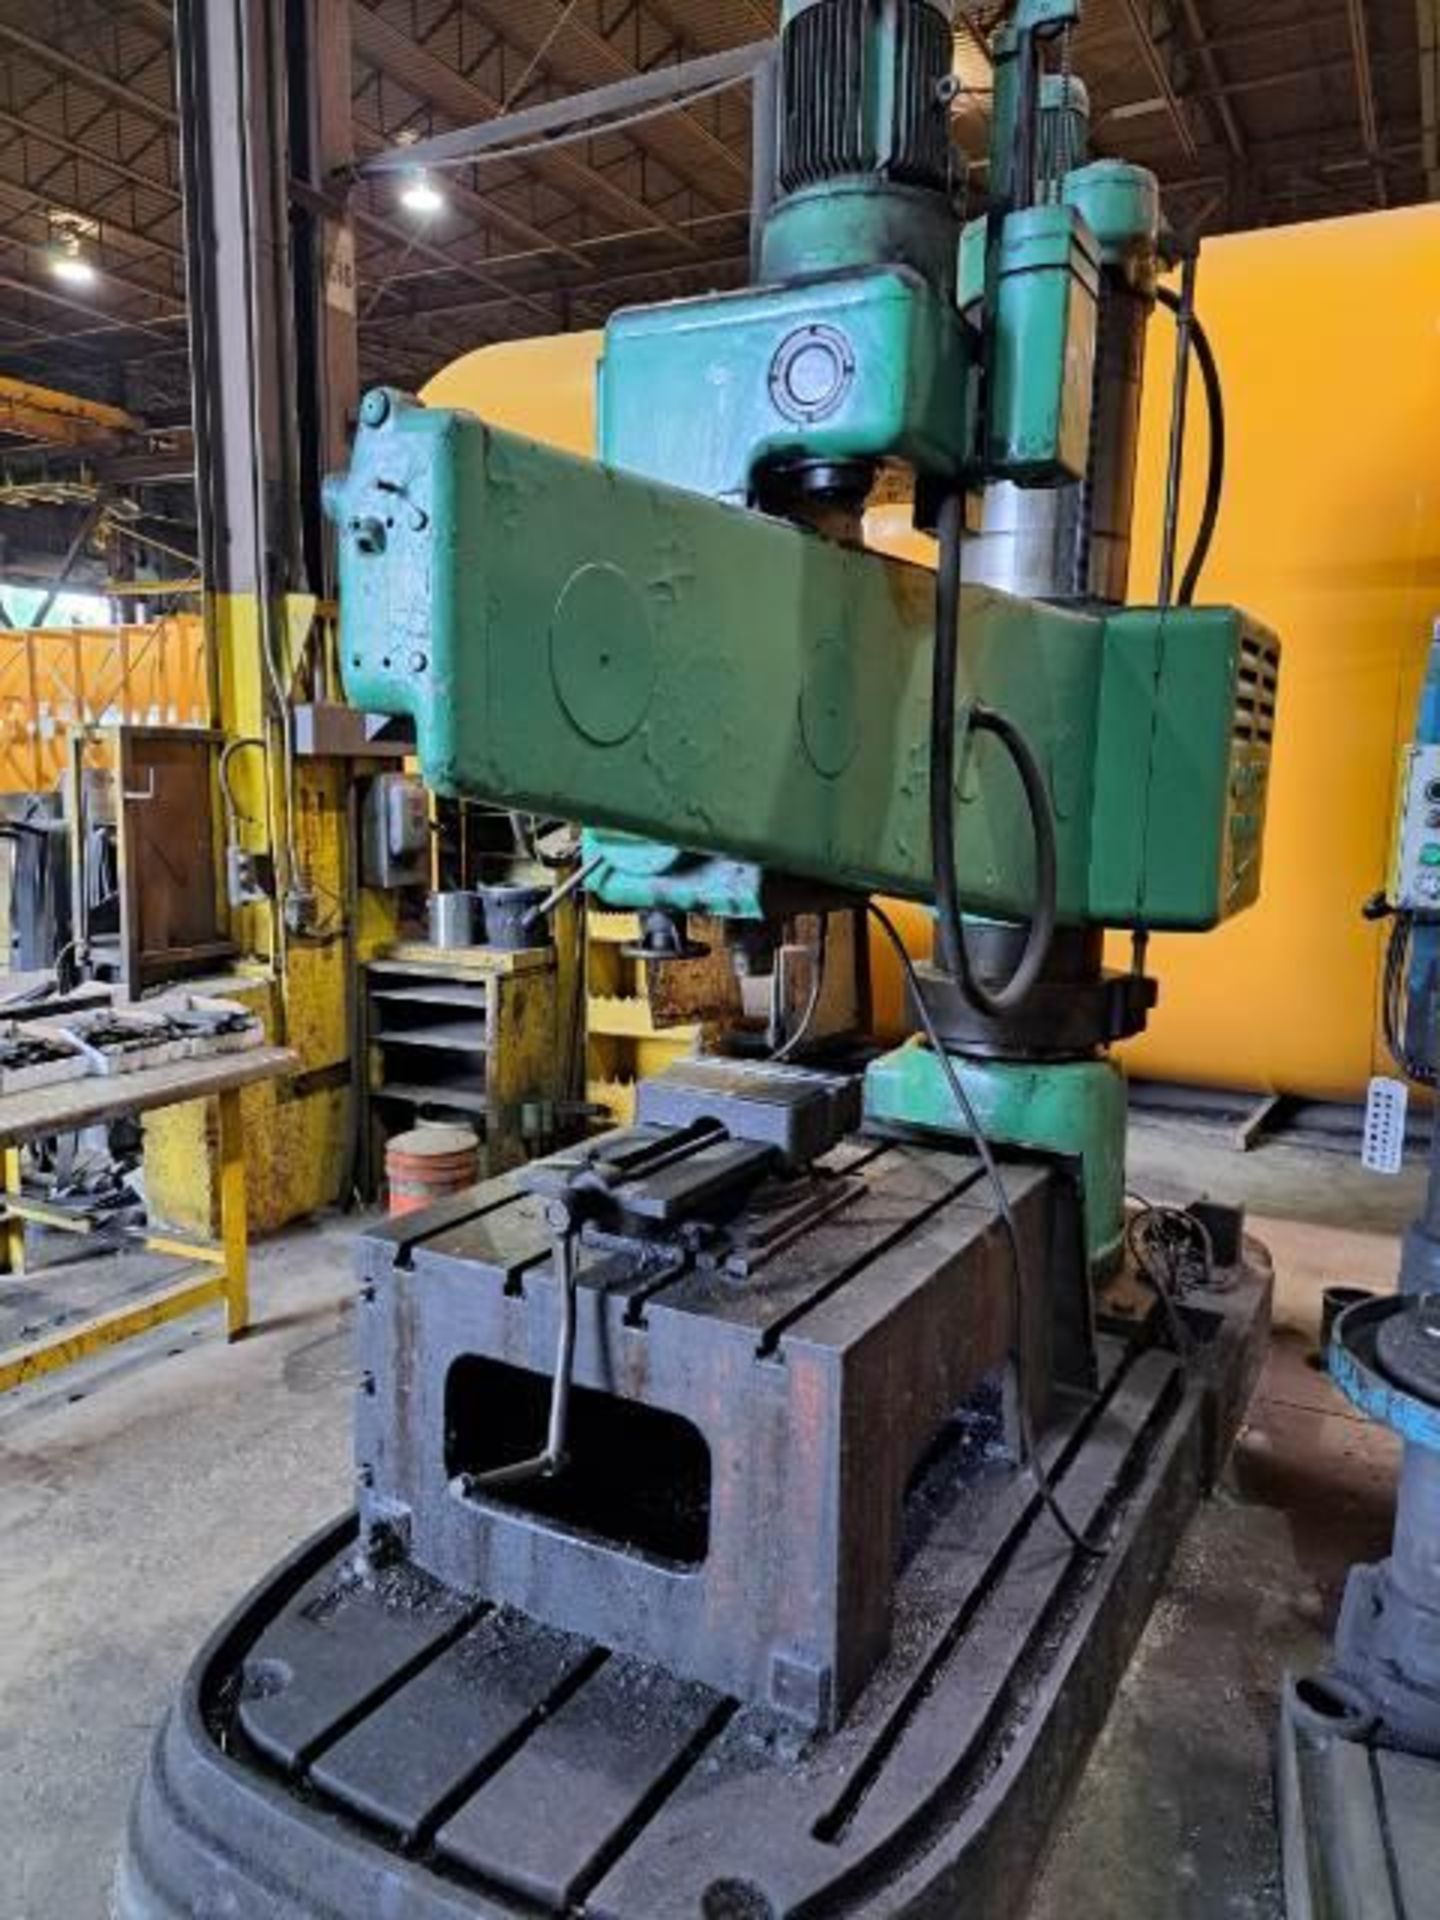 CASER F60-2000, 7' RADIAL ARM DRILL WITH 42"W X 36"L X 22"D, 14" MACHINE VISE, S/N 71005 (SOUTH CENT - Image 5 of 6